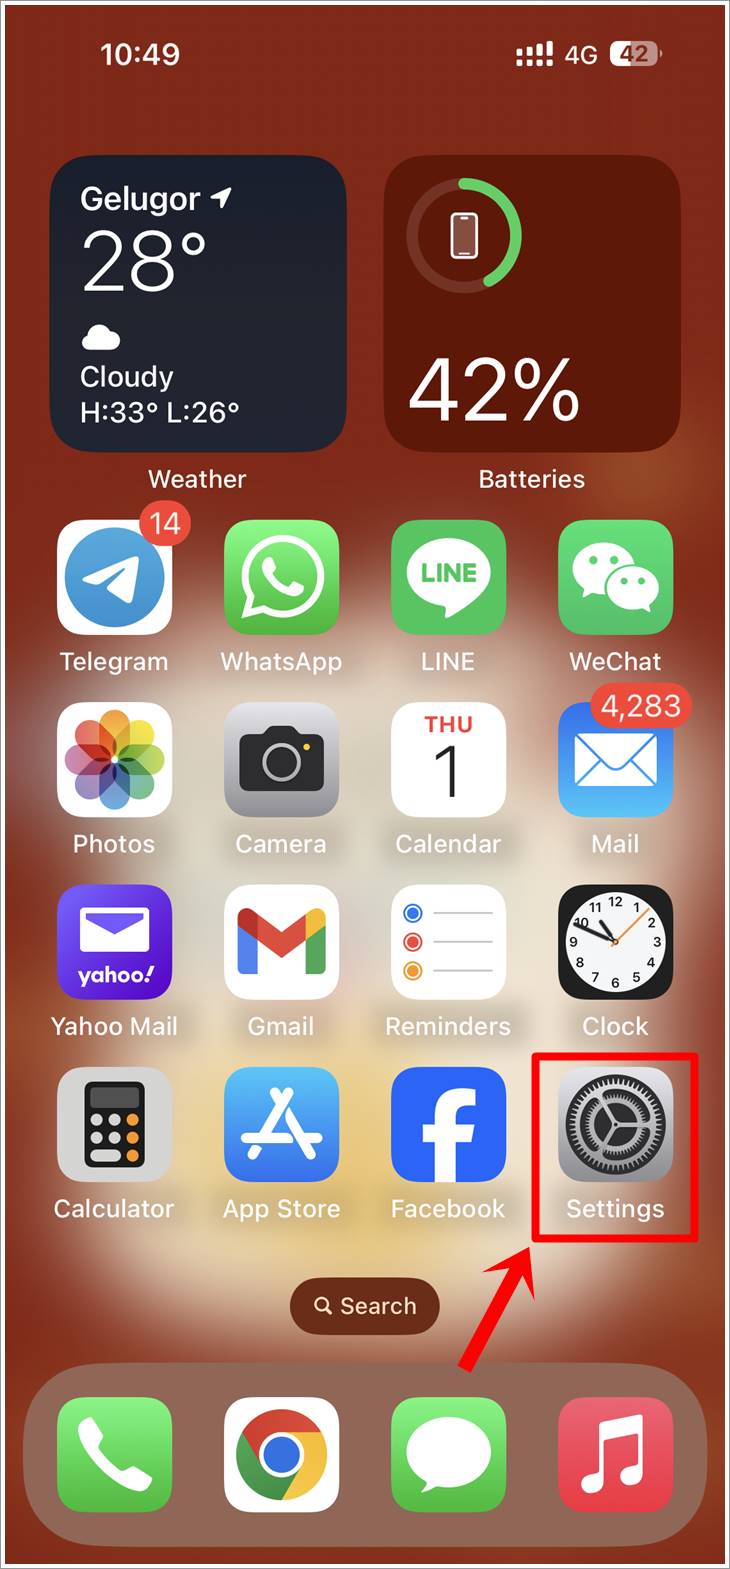 This is a screenshot of an iPhone with the 'Settings' icon highlighted.